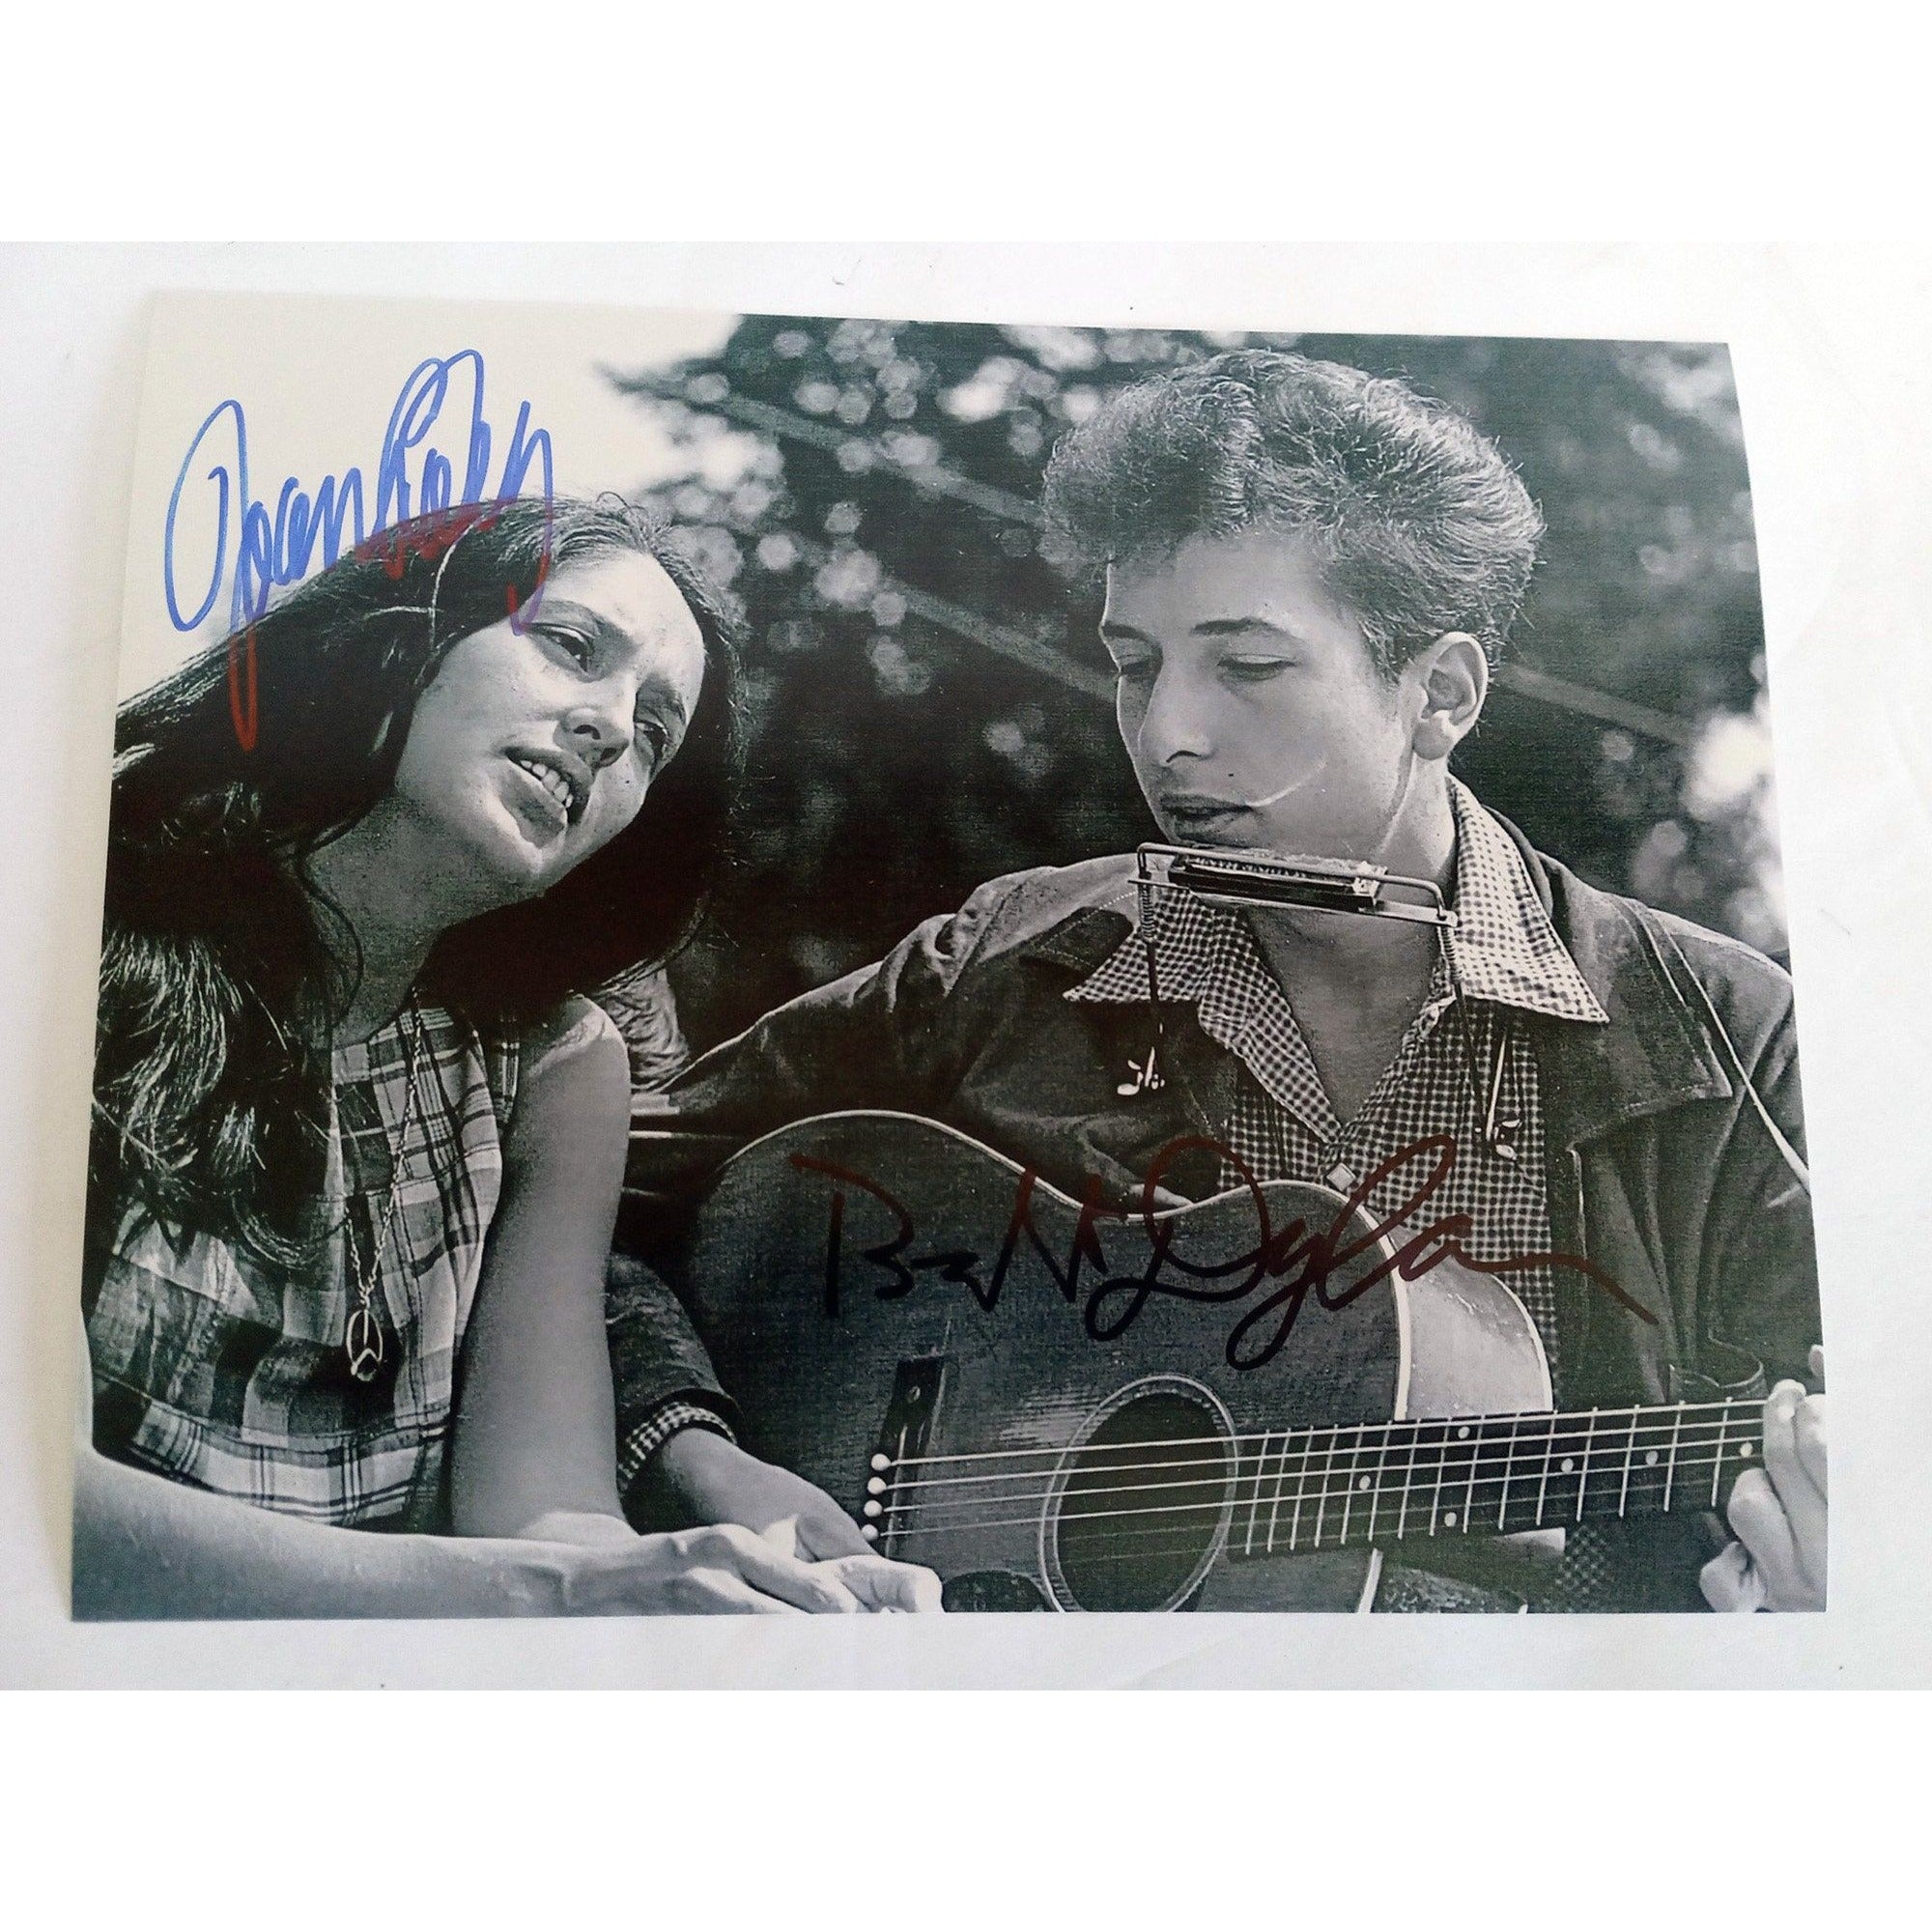 Joan Baez and Bob Dylan 8 x 10 signed photo with proof